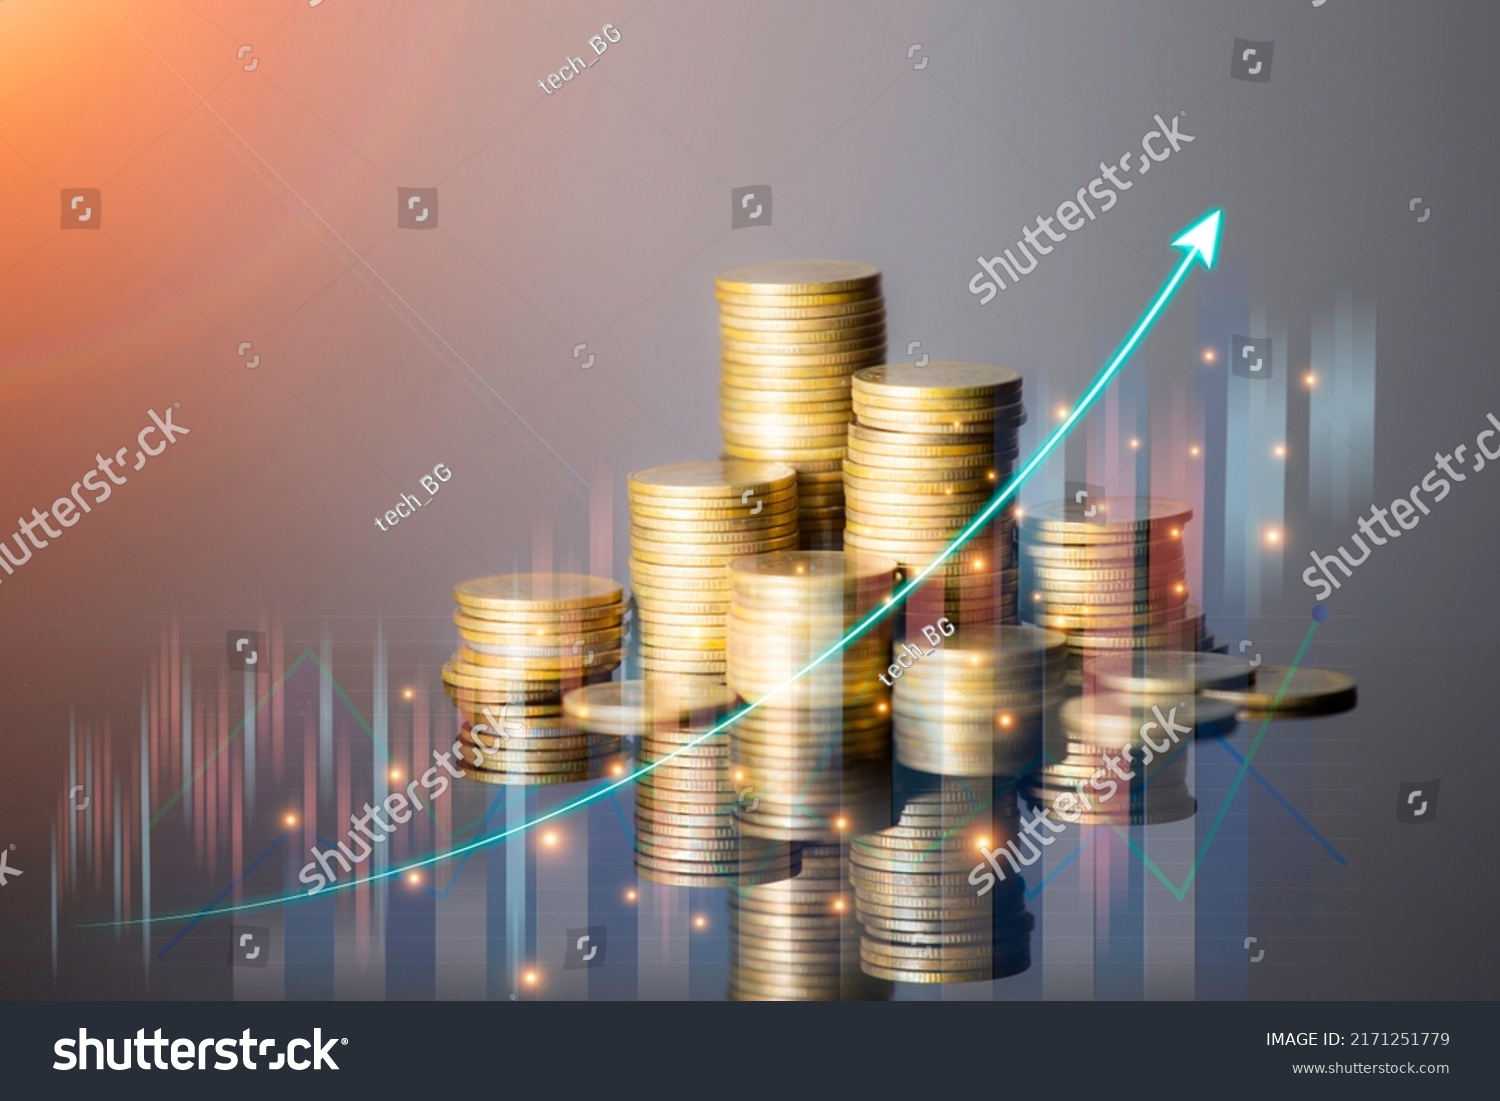 Coins are laid out in graph.Business success concept wealth stock investment.Business in the digital age.Digital transformation for next generation technology.Technology is growing by leaps and bounds #2171251779